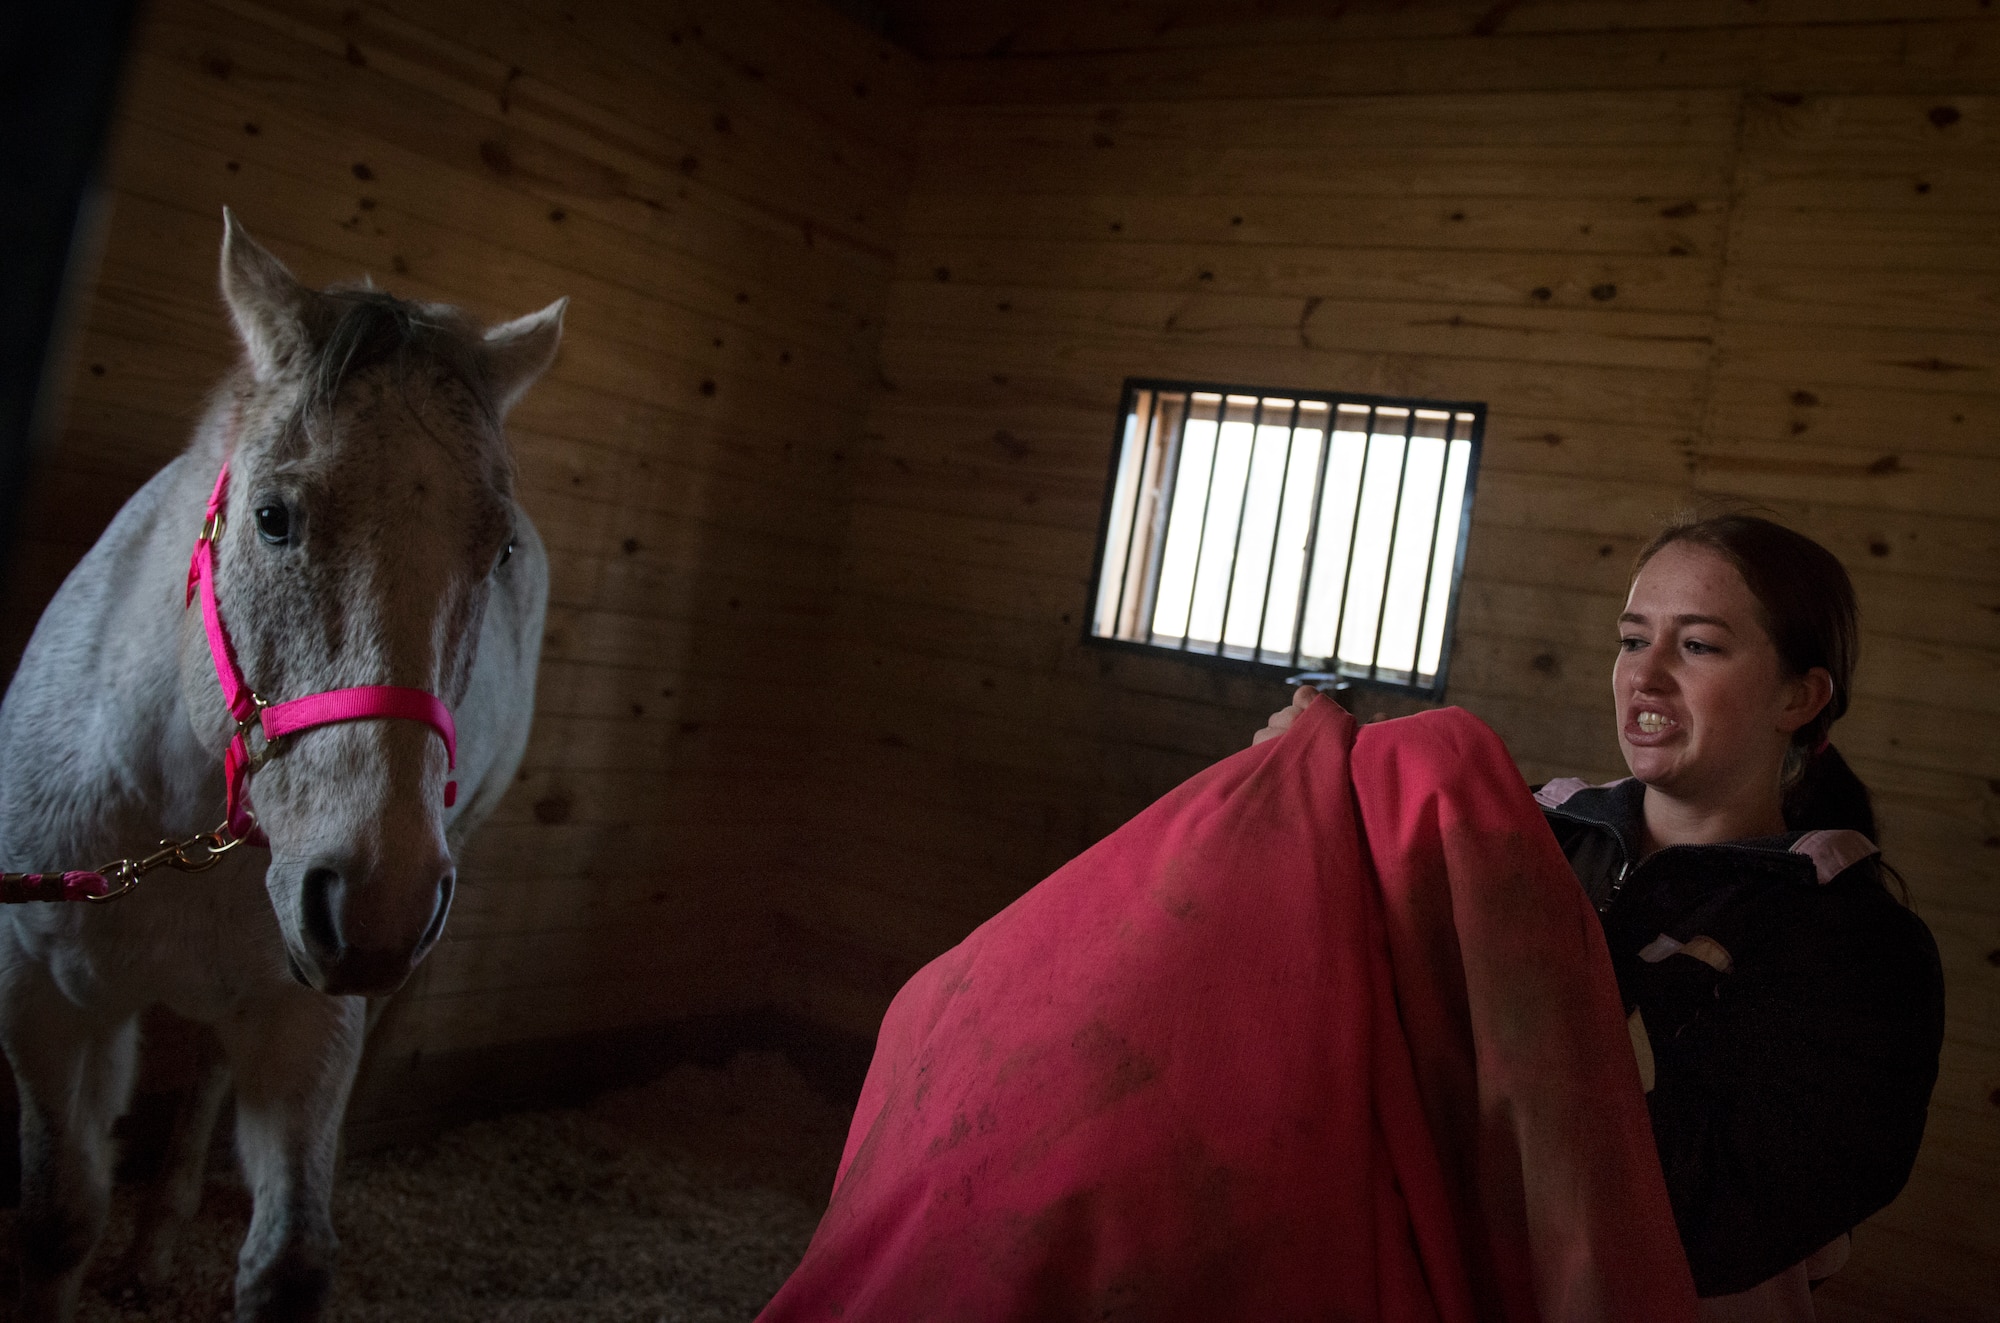 Airman 1st Class Kaitlyn Evans dusts off Kobalt's coat after a muddy day at a horse stable in Lothian, Maryland. During the winter months, Kobalt is housed in a barn to stay warm. Evans, an 11th Security Forces Squadron patrolman at Andrews Air Force Base, Maryland, spends time cleaning and training with Kobalt for day-to-day relaxation and therapy. (U.S. Air Force photo/Staff Sgt. Vernon Young Jr.)